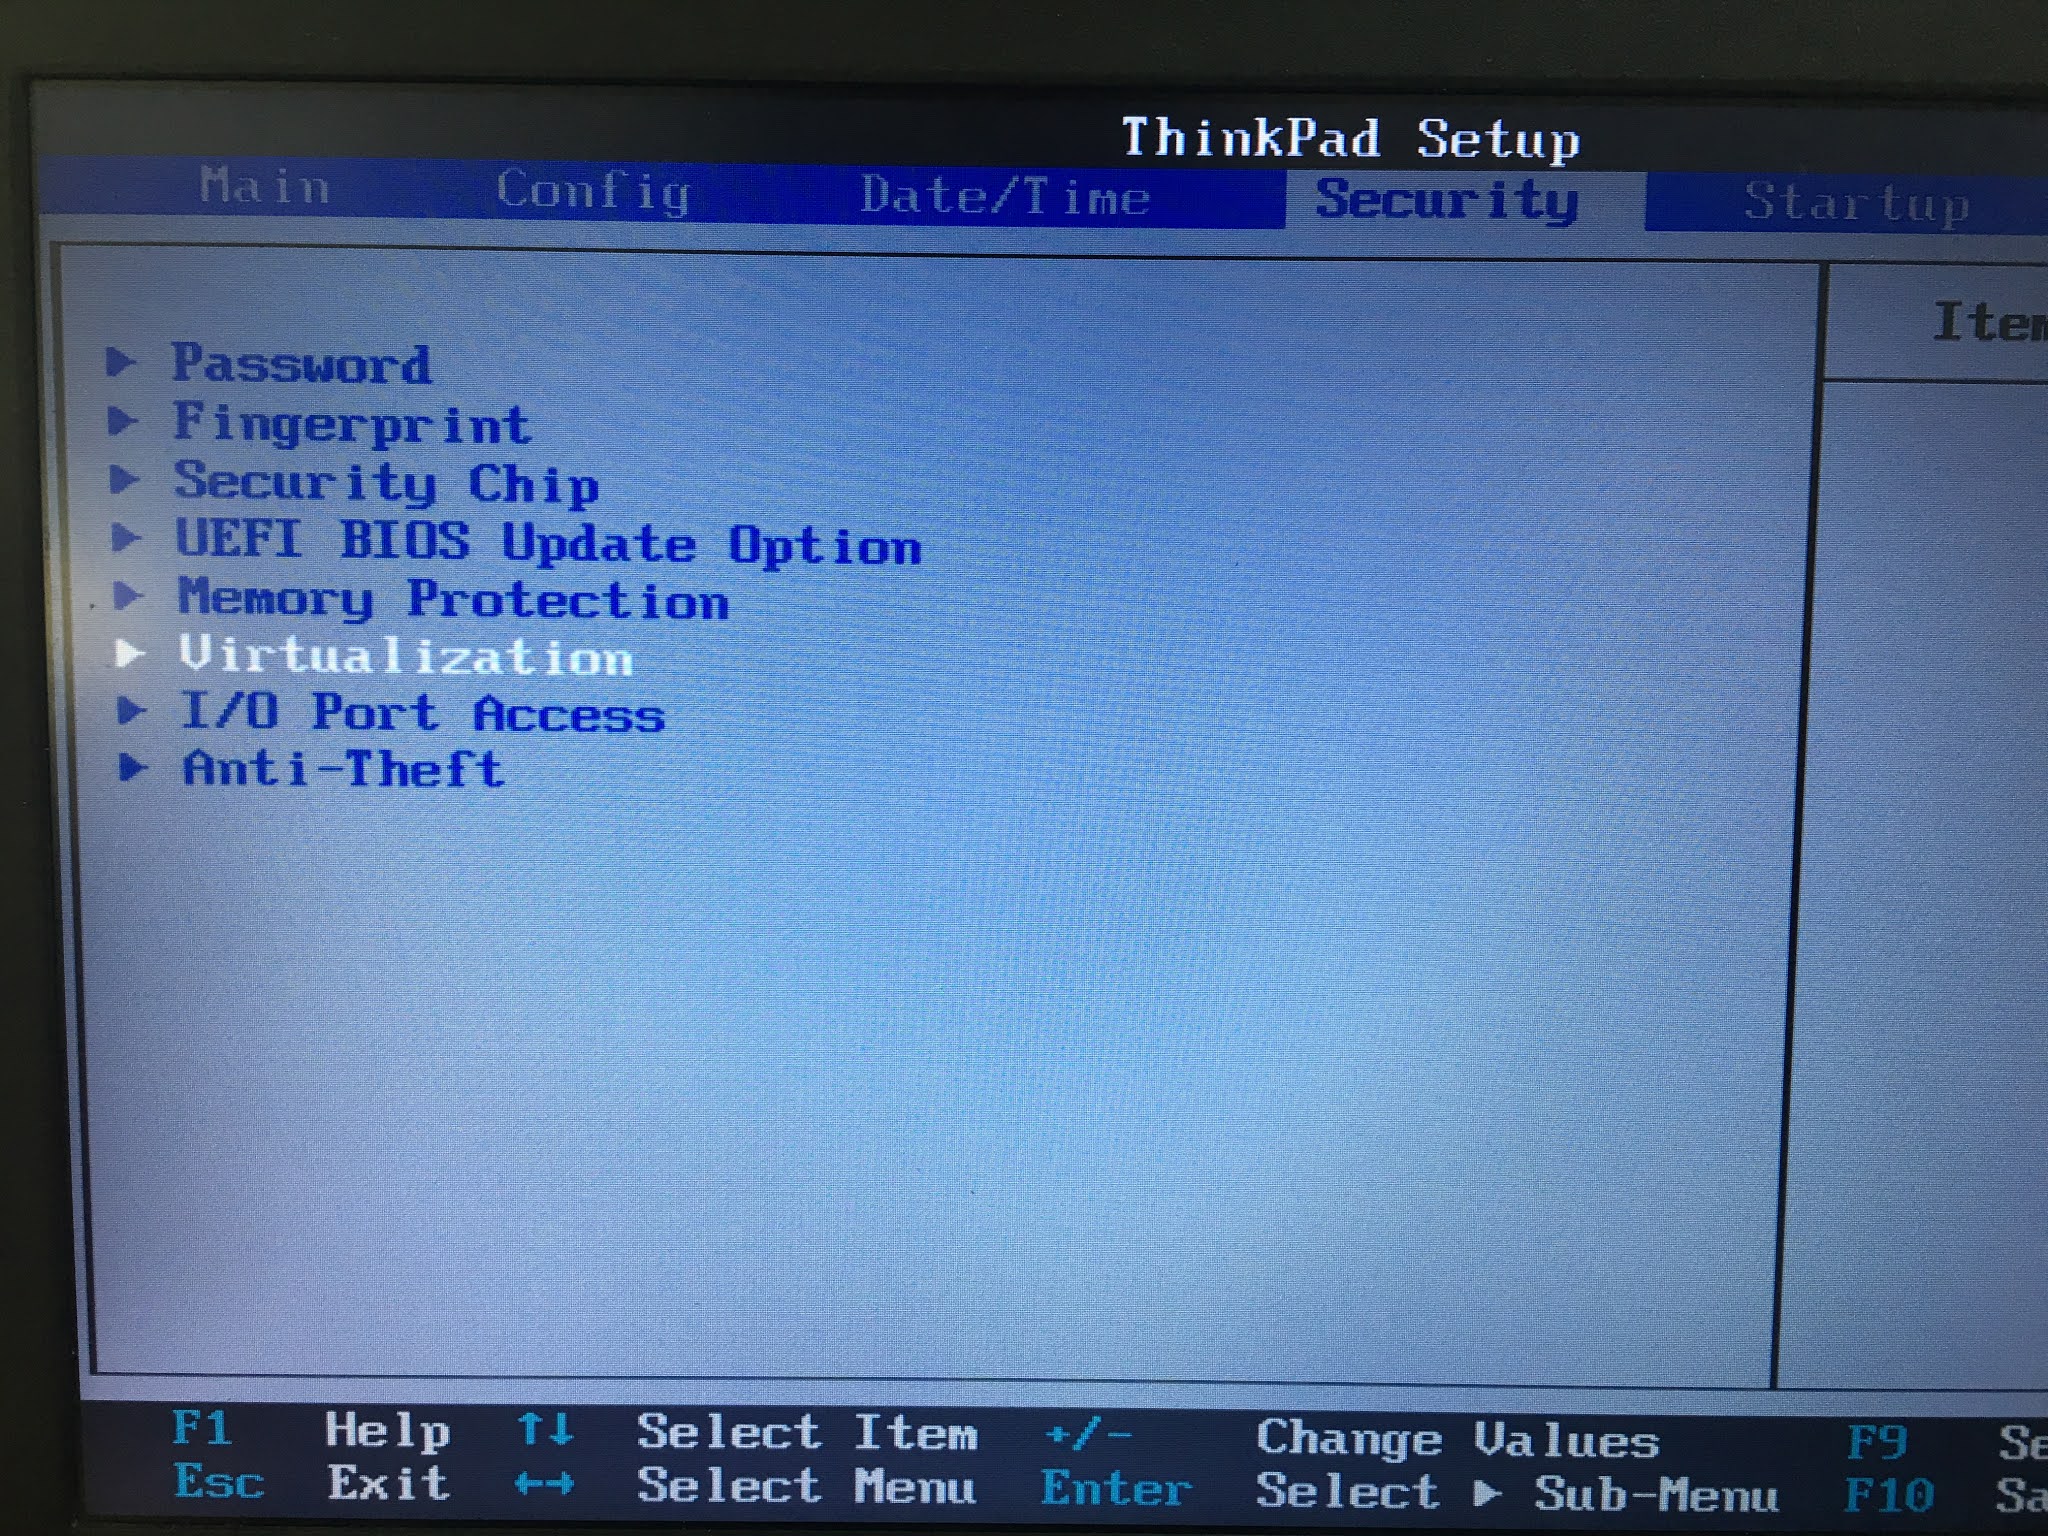 vt support in in the talitre and in the bios